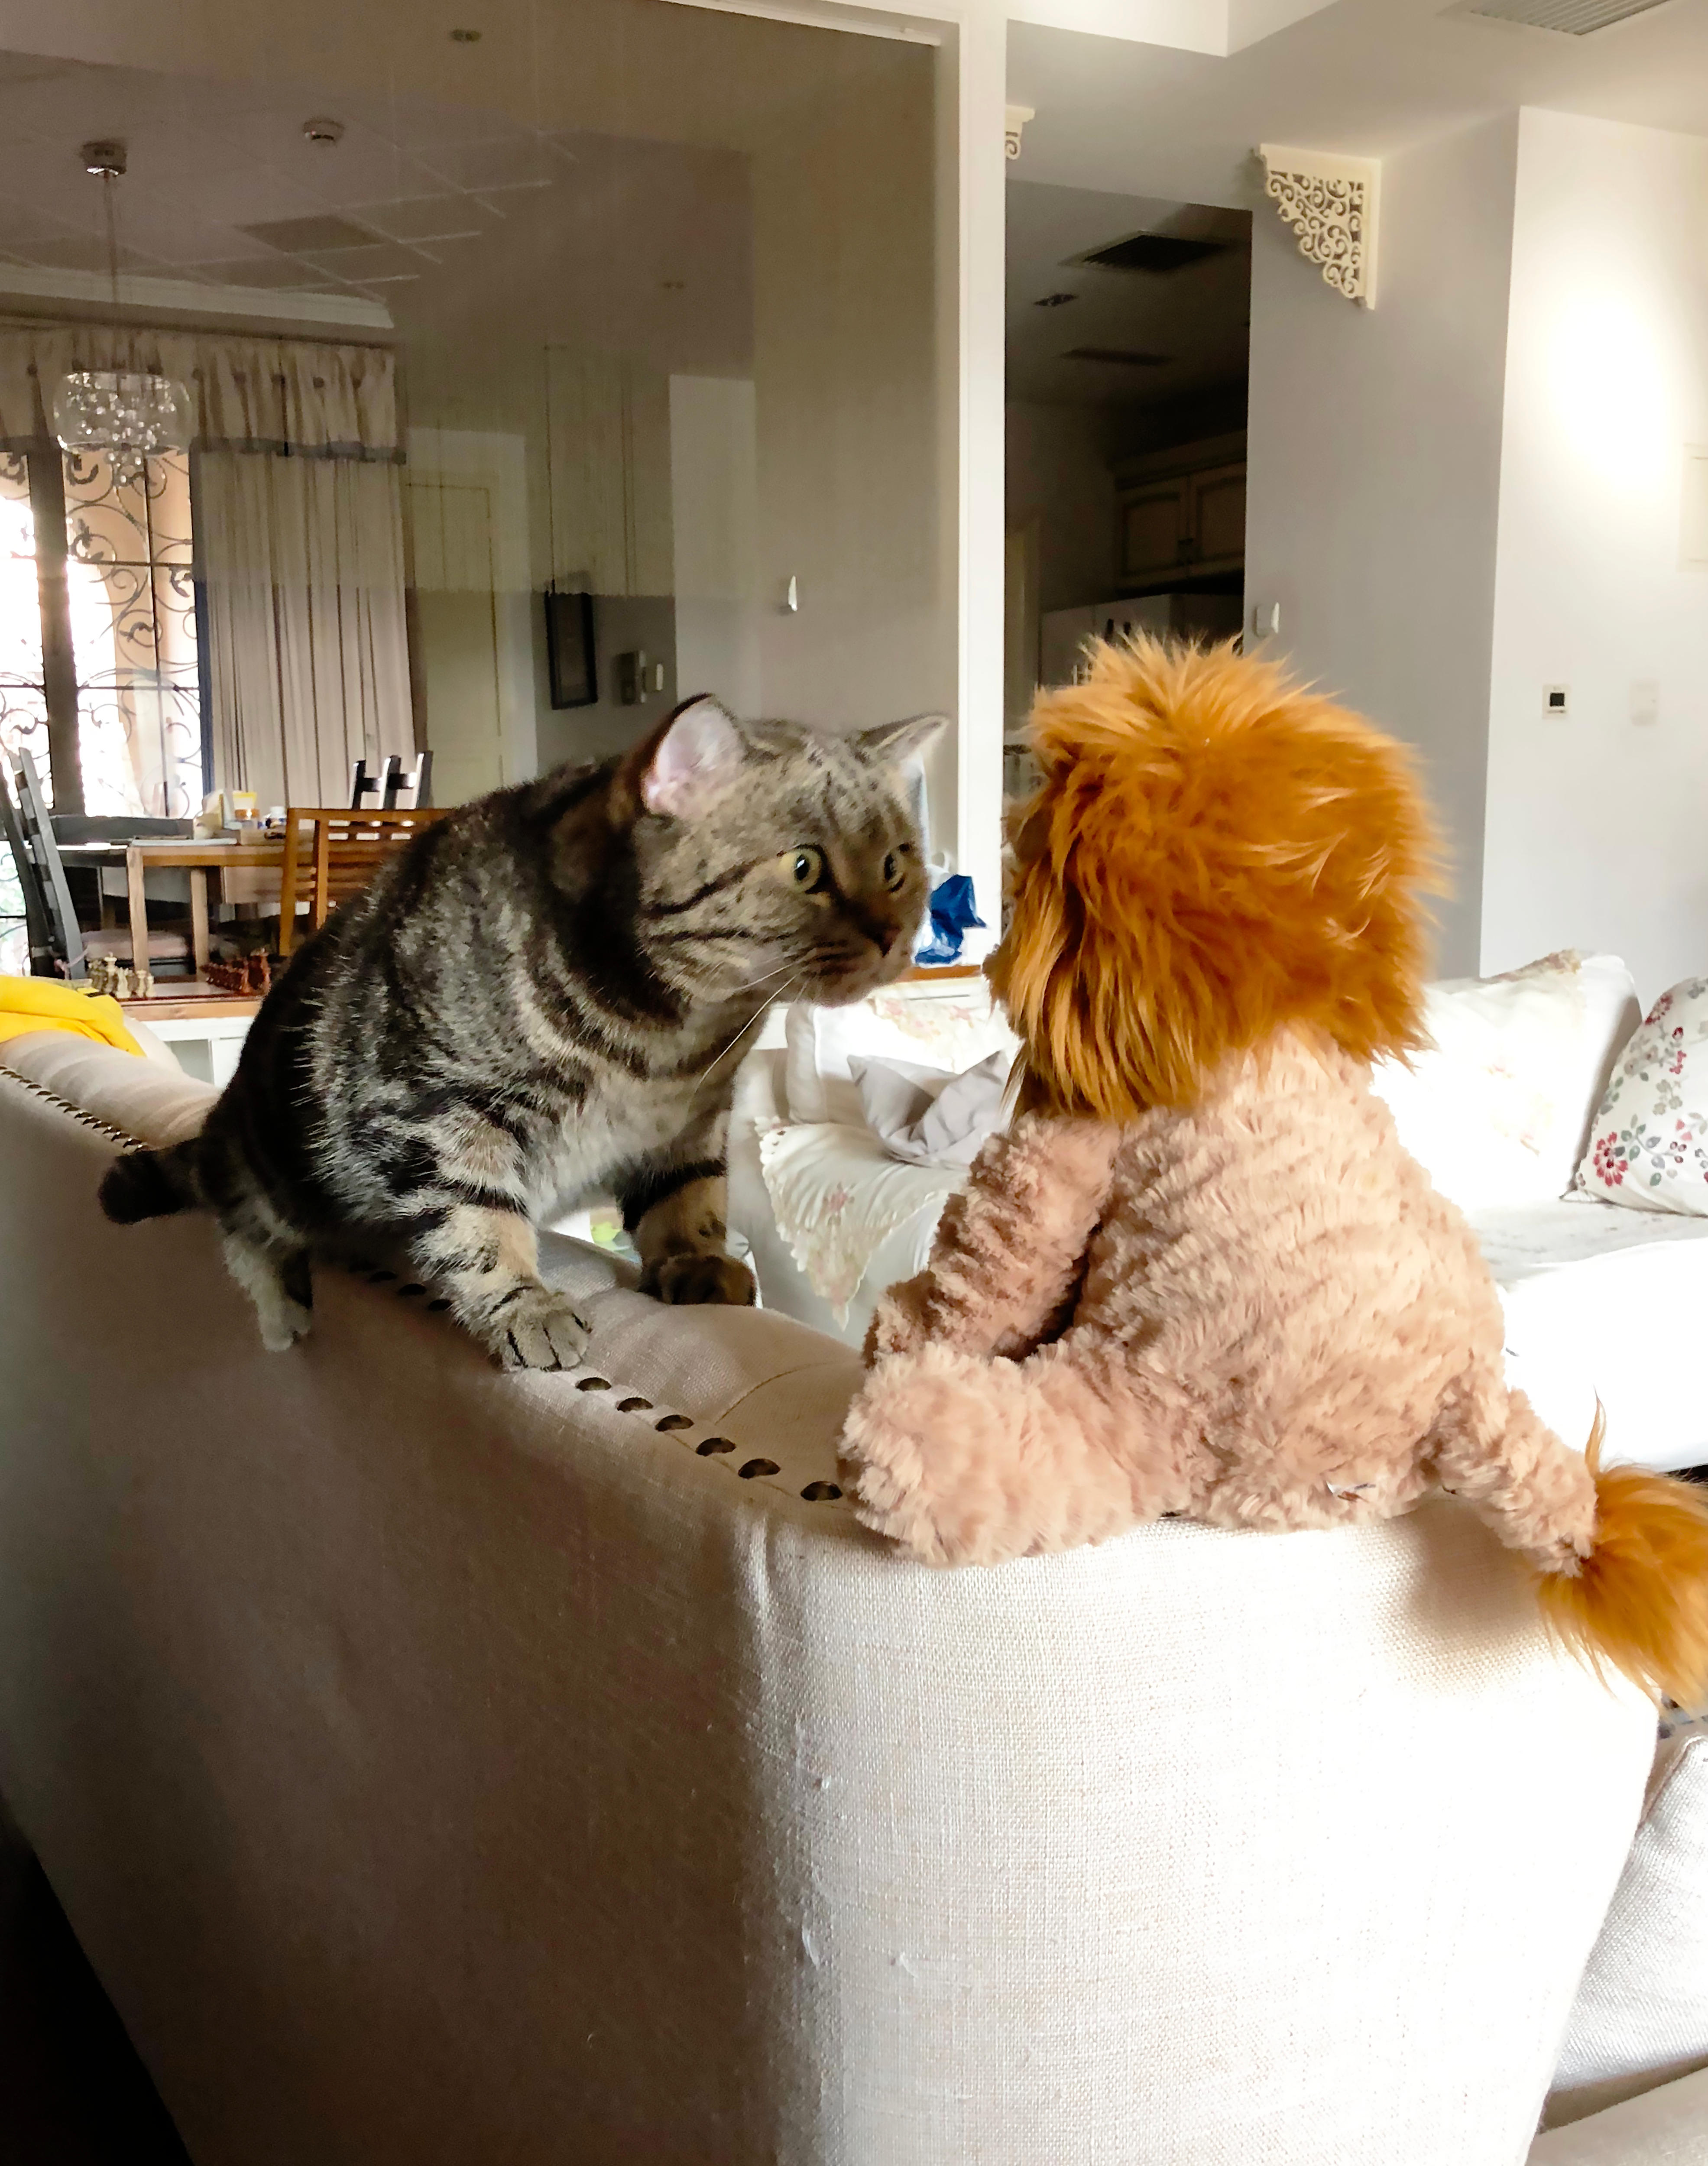 A cat looking so confused at a lion plush toy